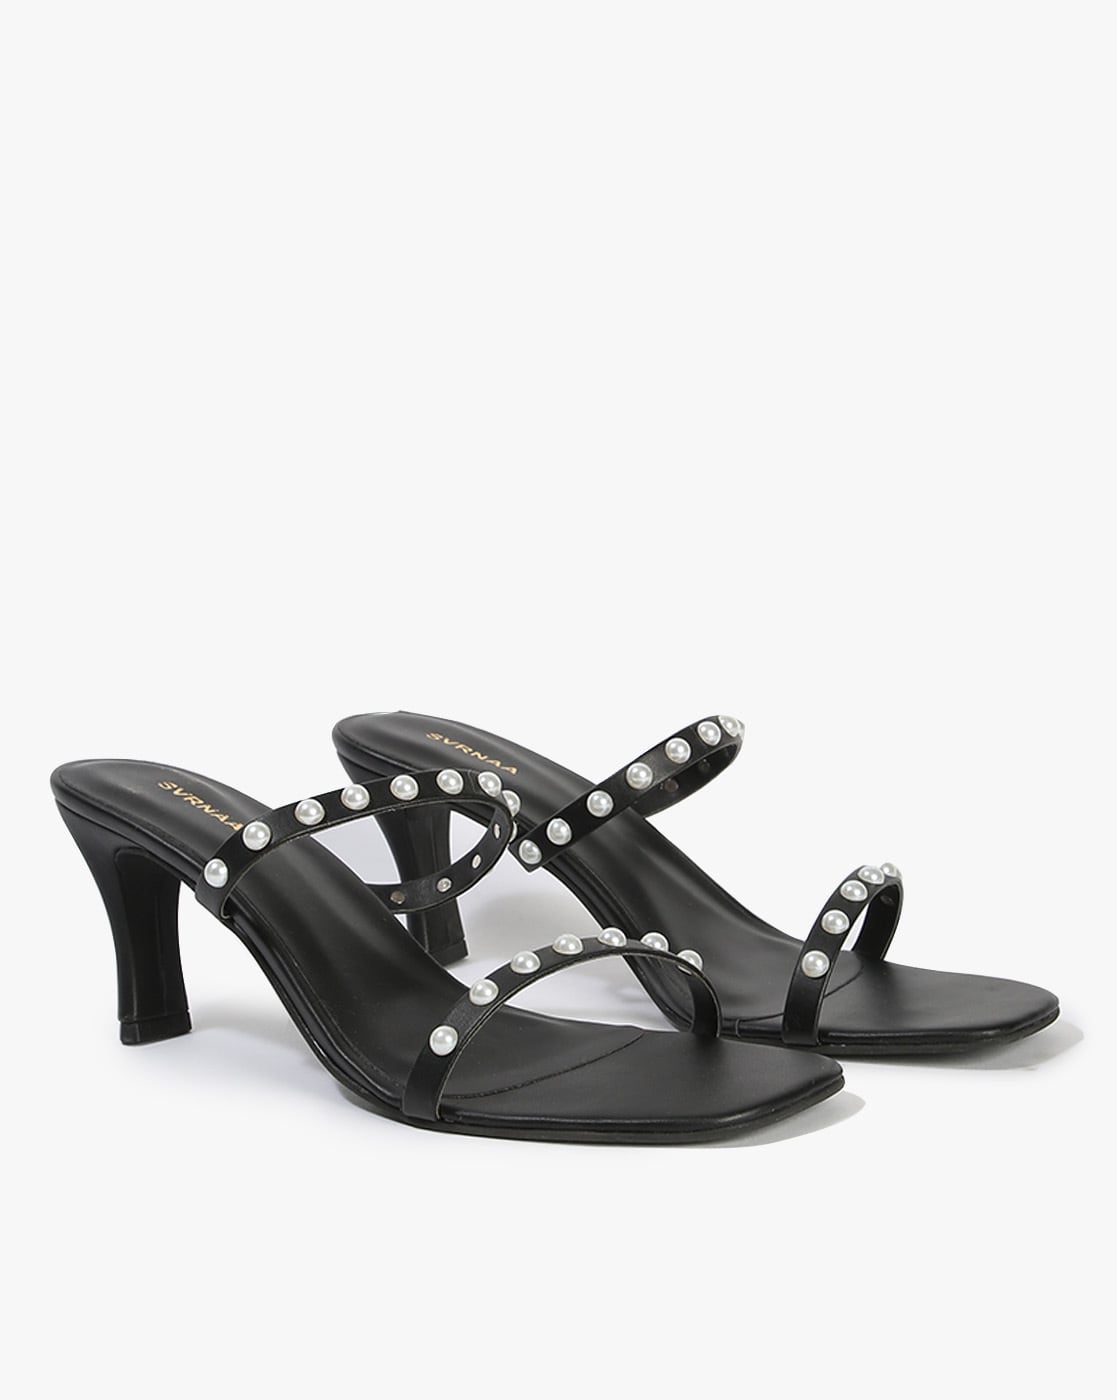 Black Strappy Sandals To Buy In 2019 All Heel Heights